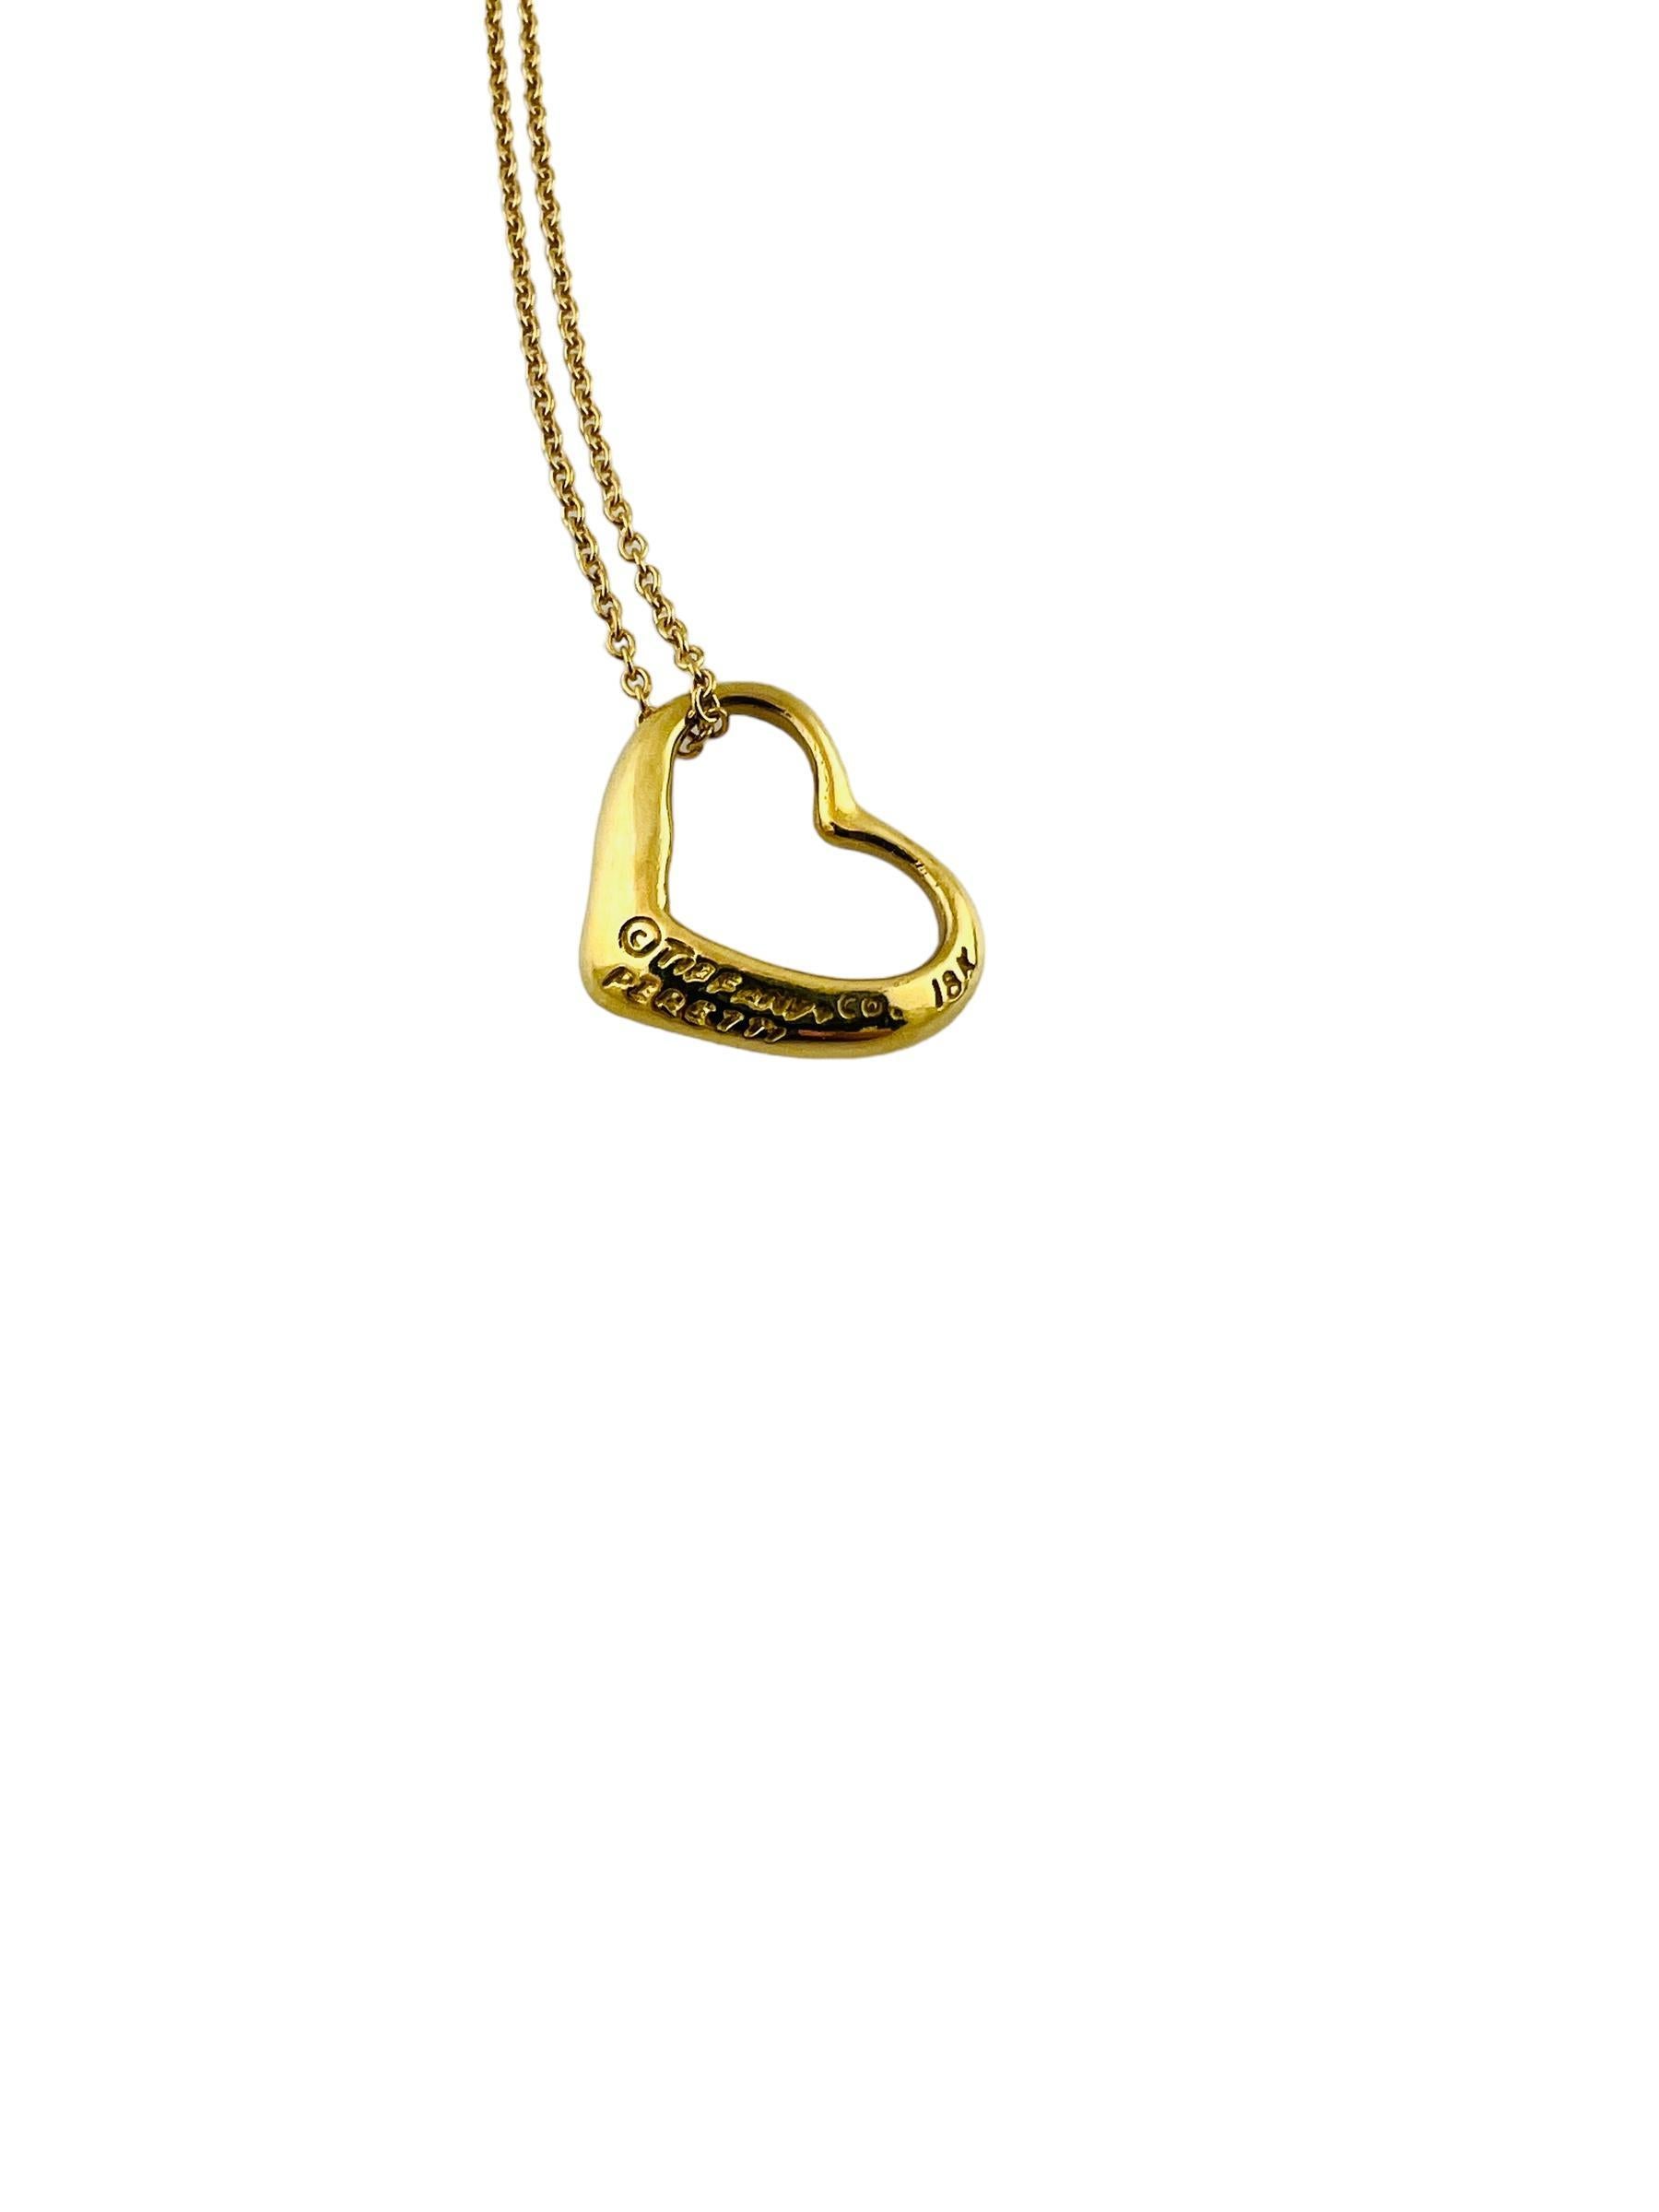 Tiffany & Co. Elsa Peretti 18K Yellow Gold Open Heart Pendant Necklace

This classic Tiffany & Co. open heart pendant necklace was designed by Elsa Peretti.

Tiffany chain is approx. 16